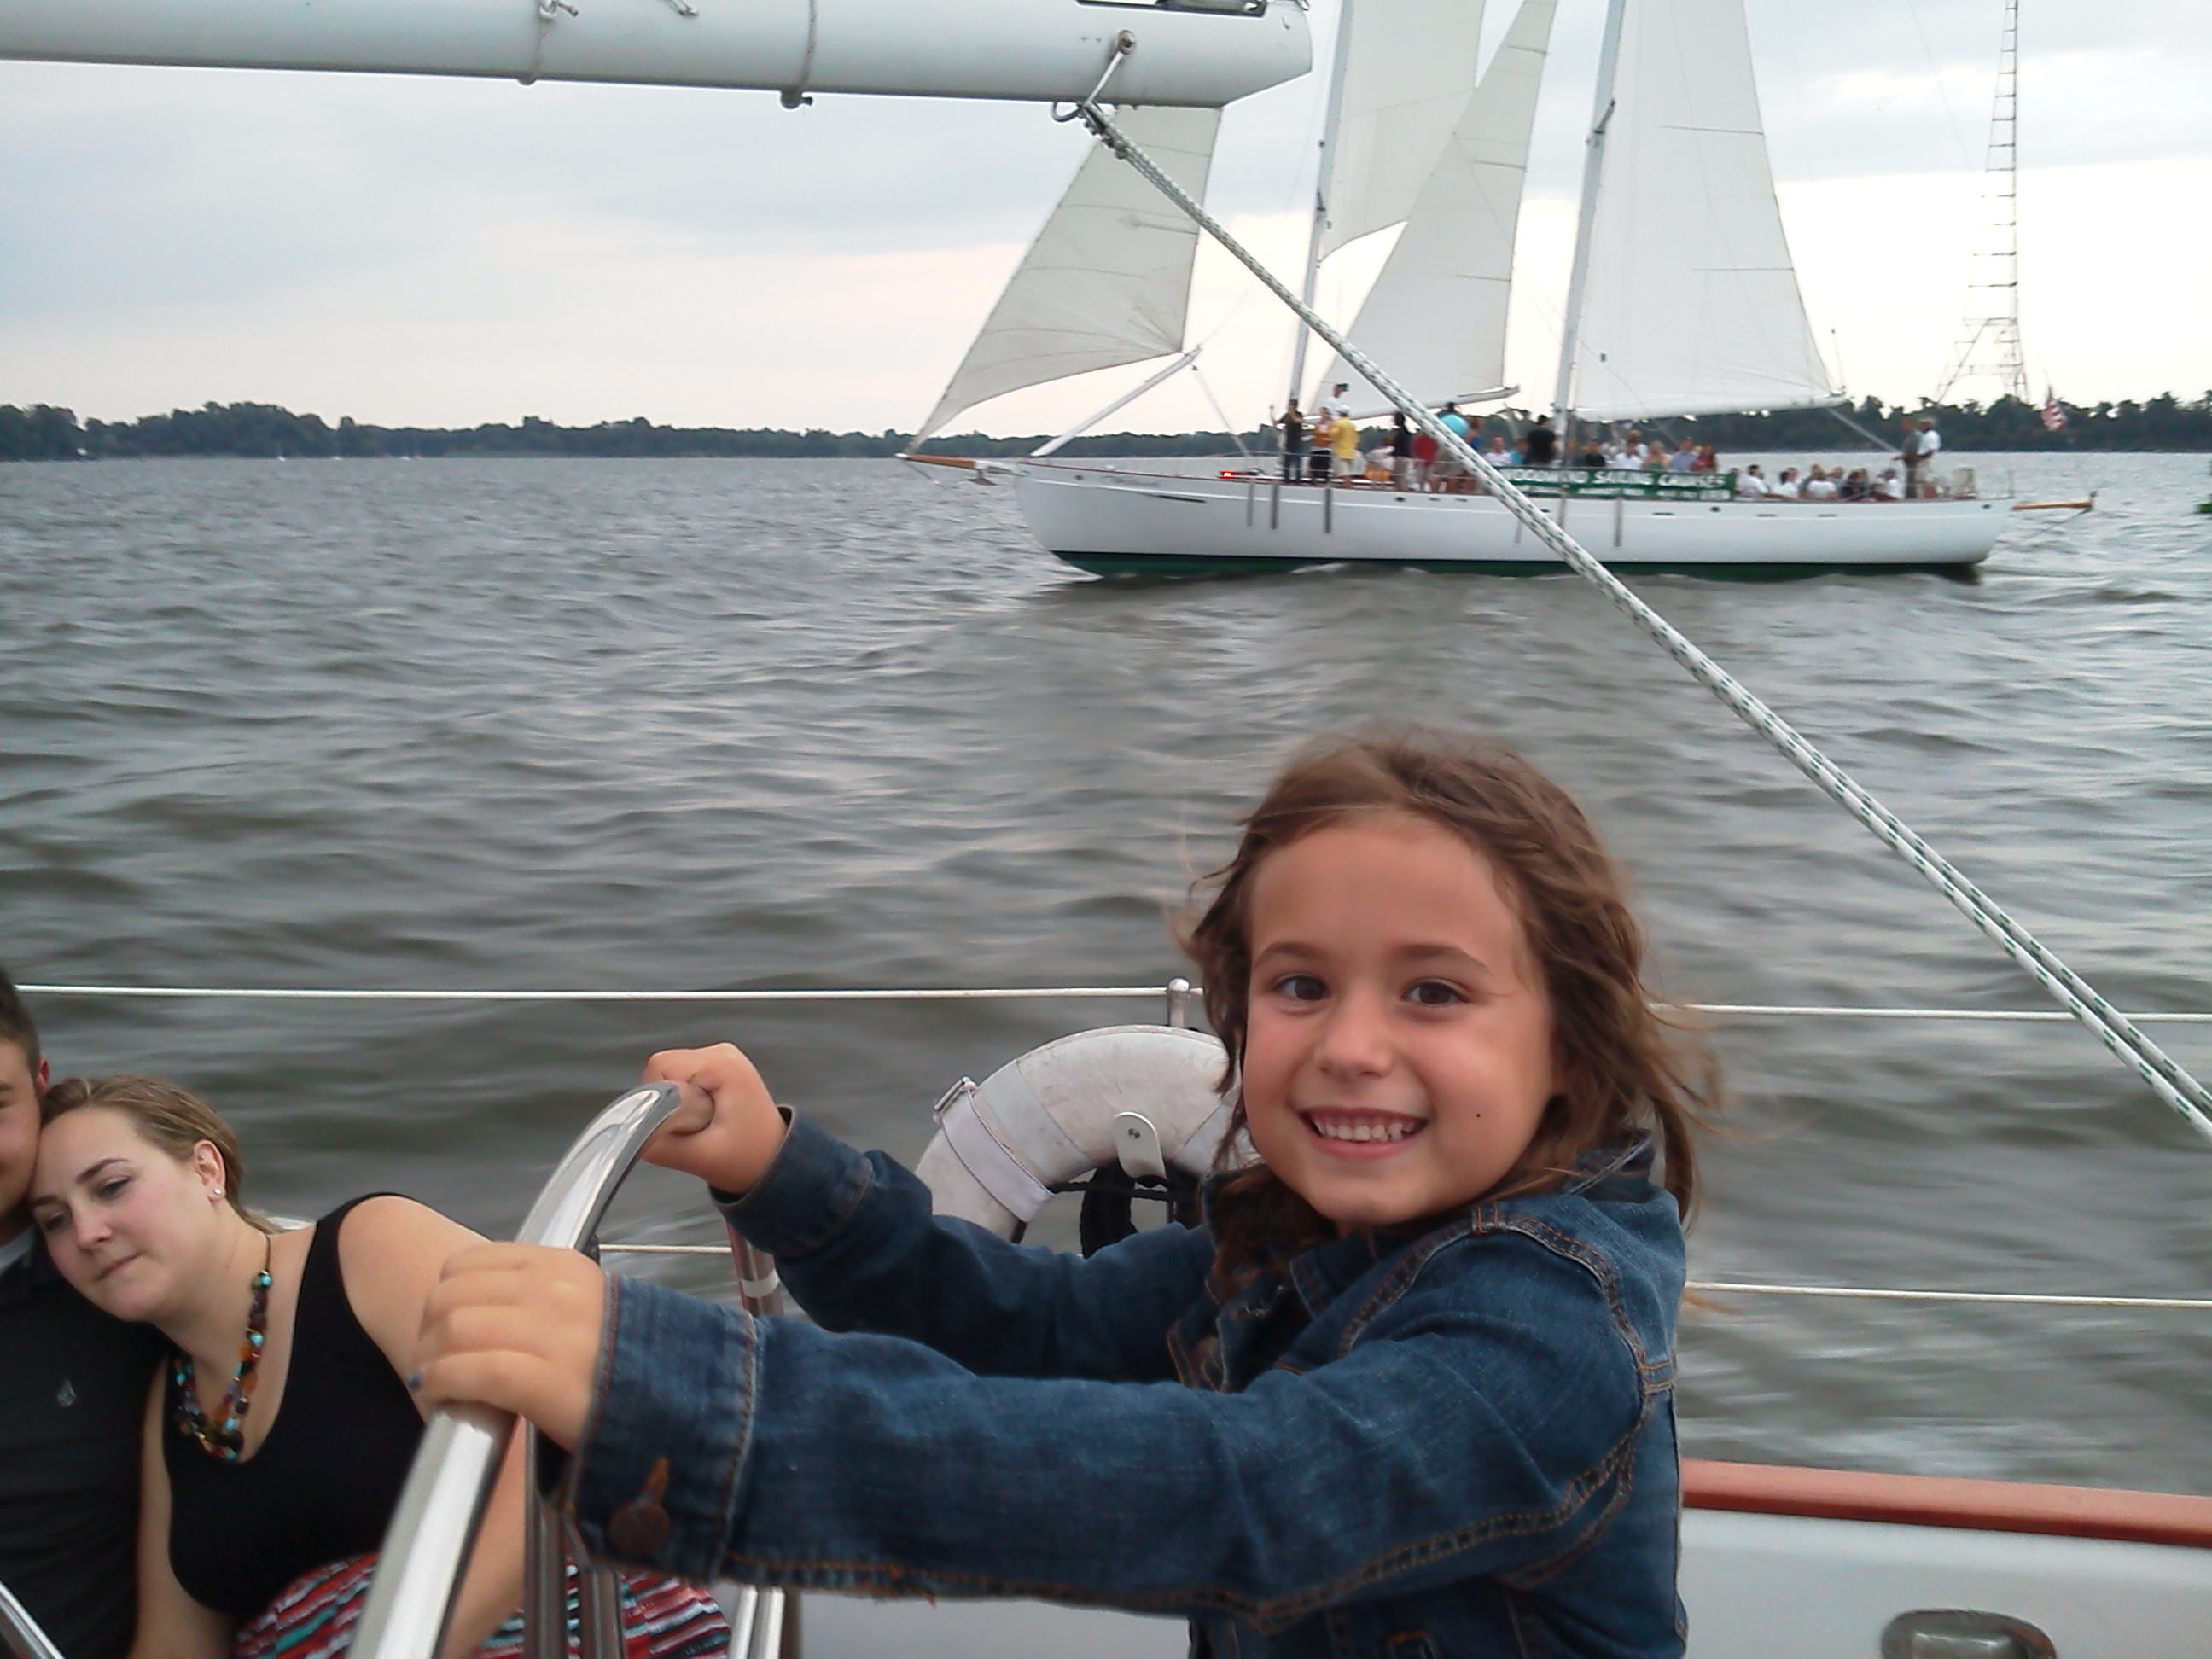 Young Millie sailing Woodwind II while "racing" Woodwind back into the harbor.